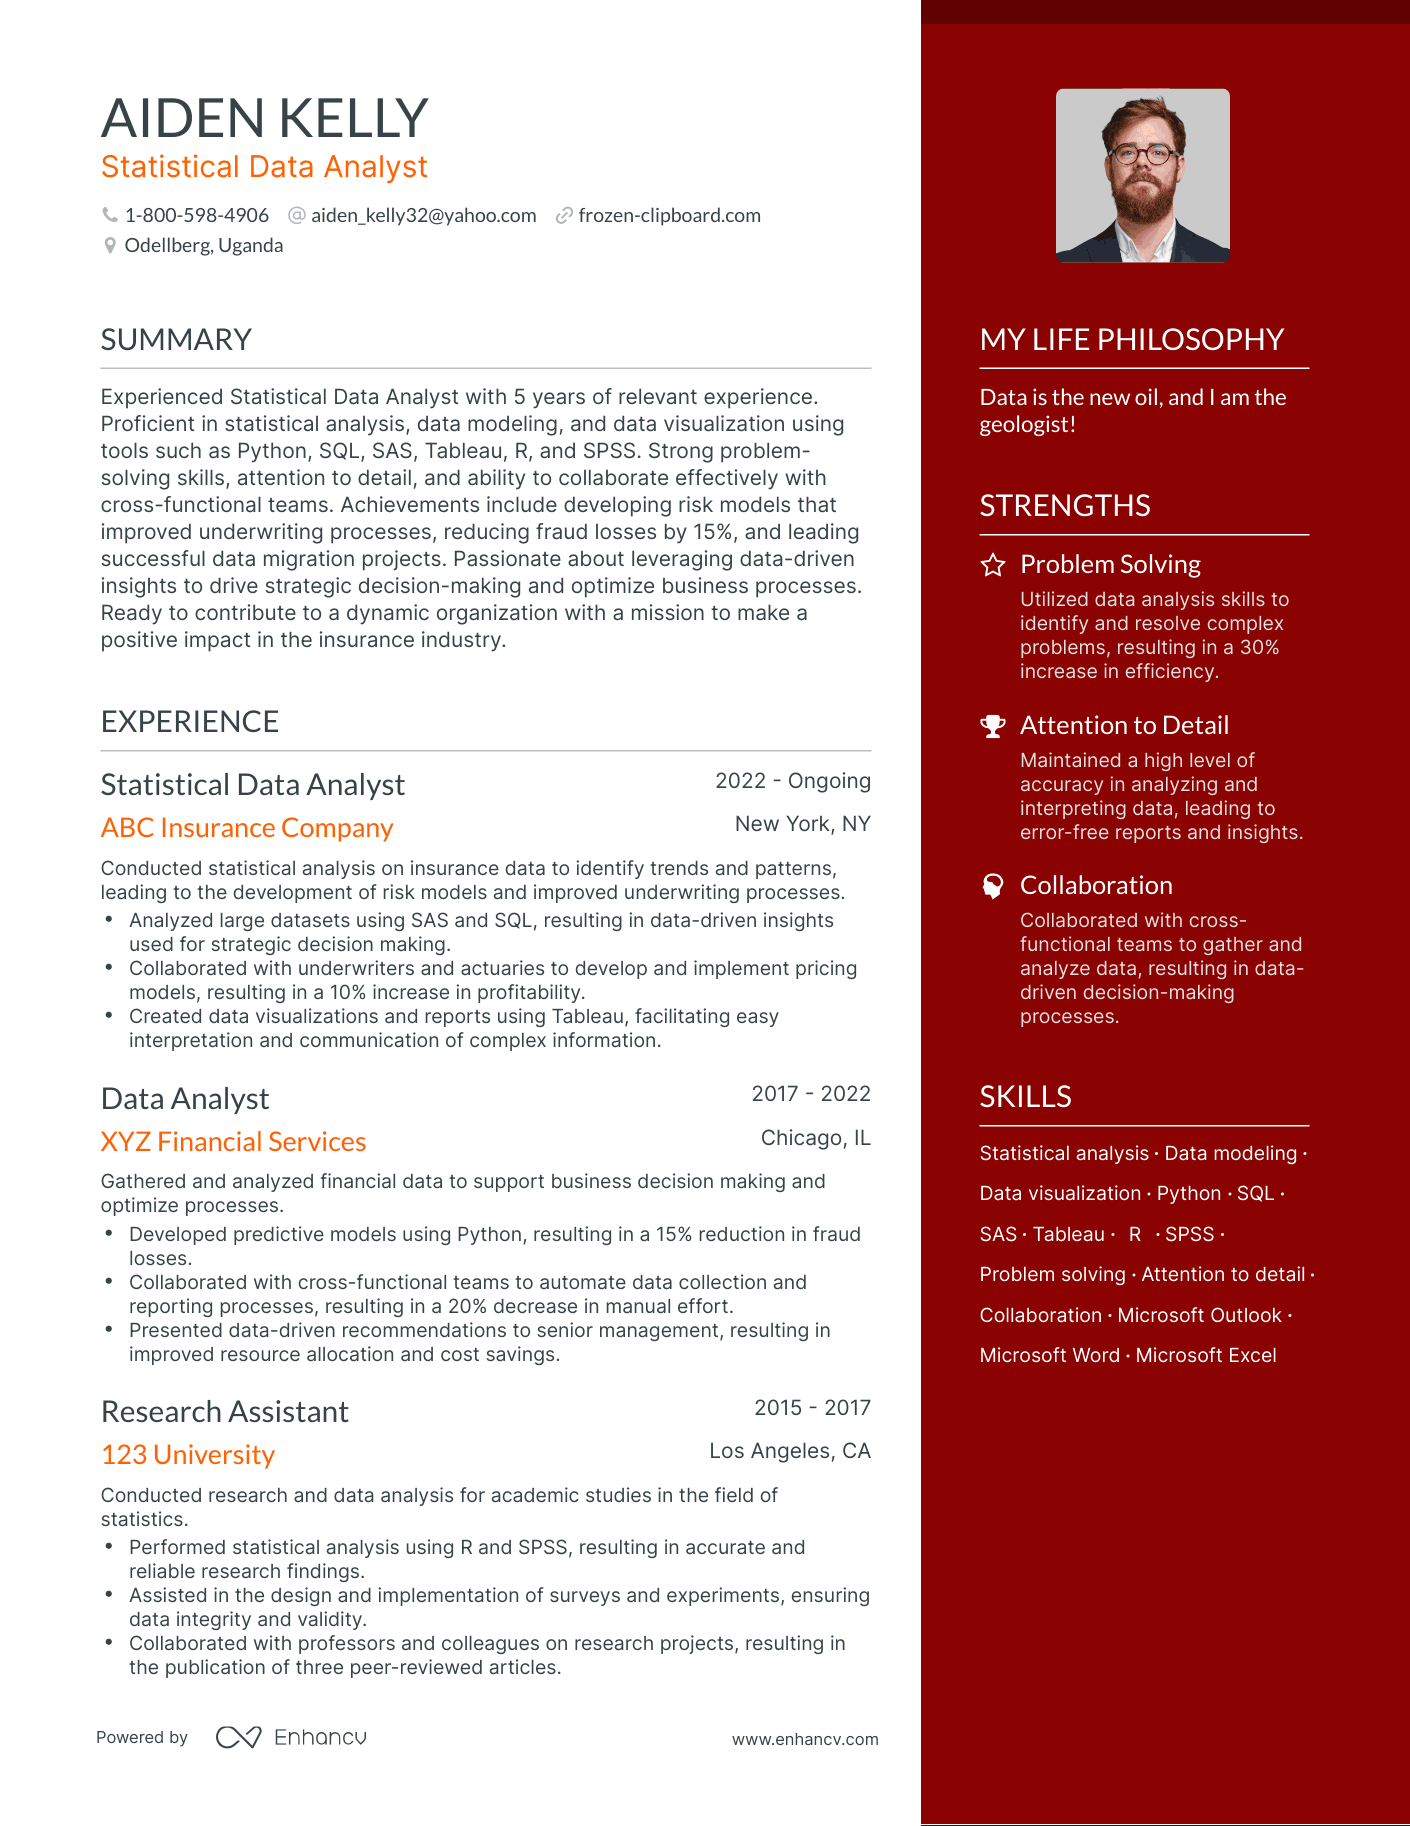 Statistical Data Analyst resume example